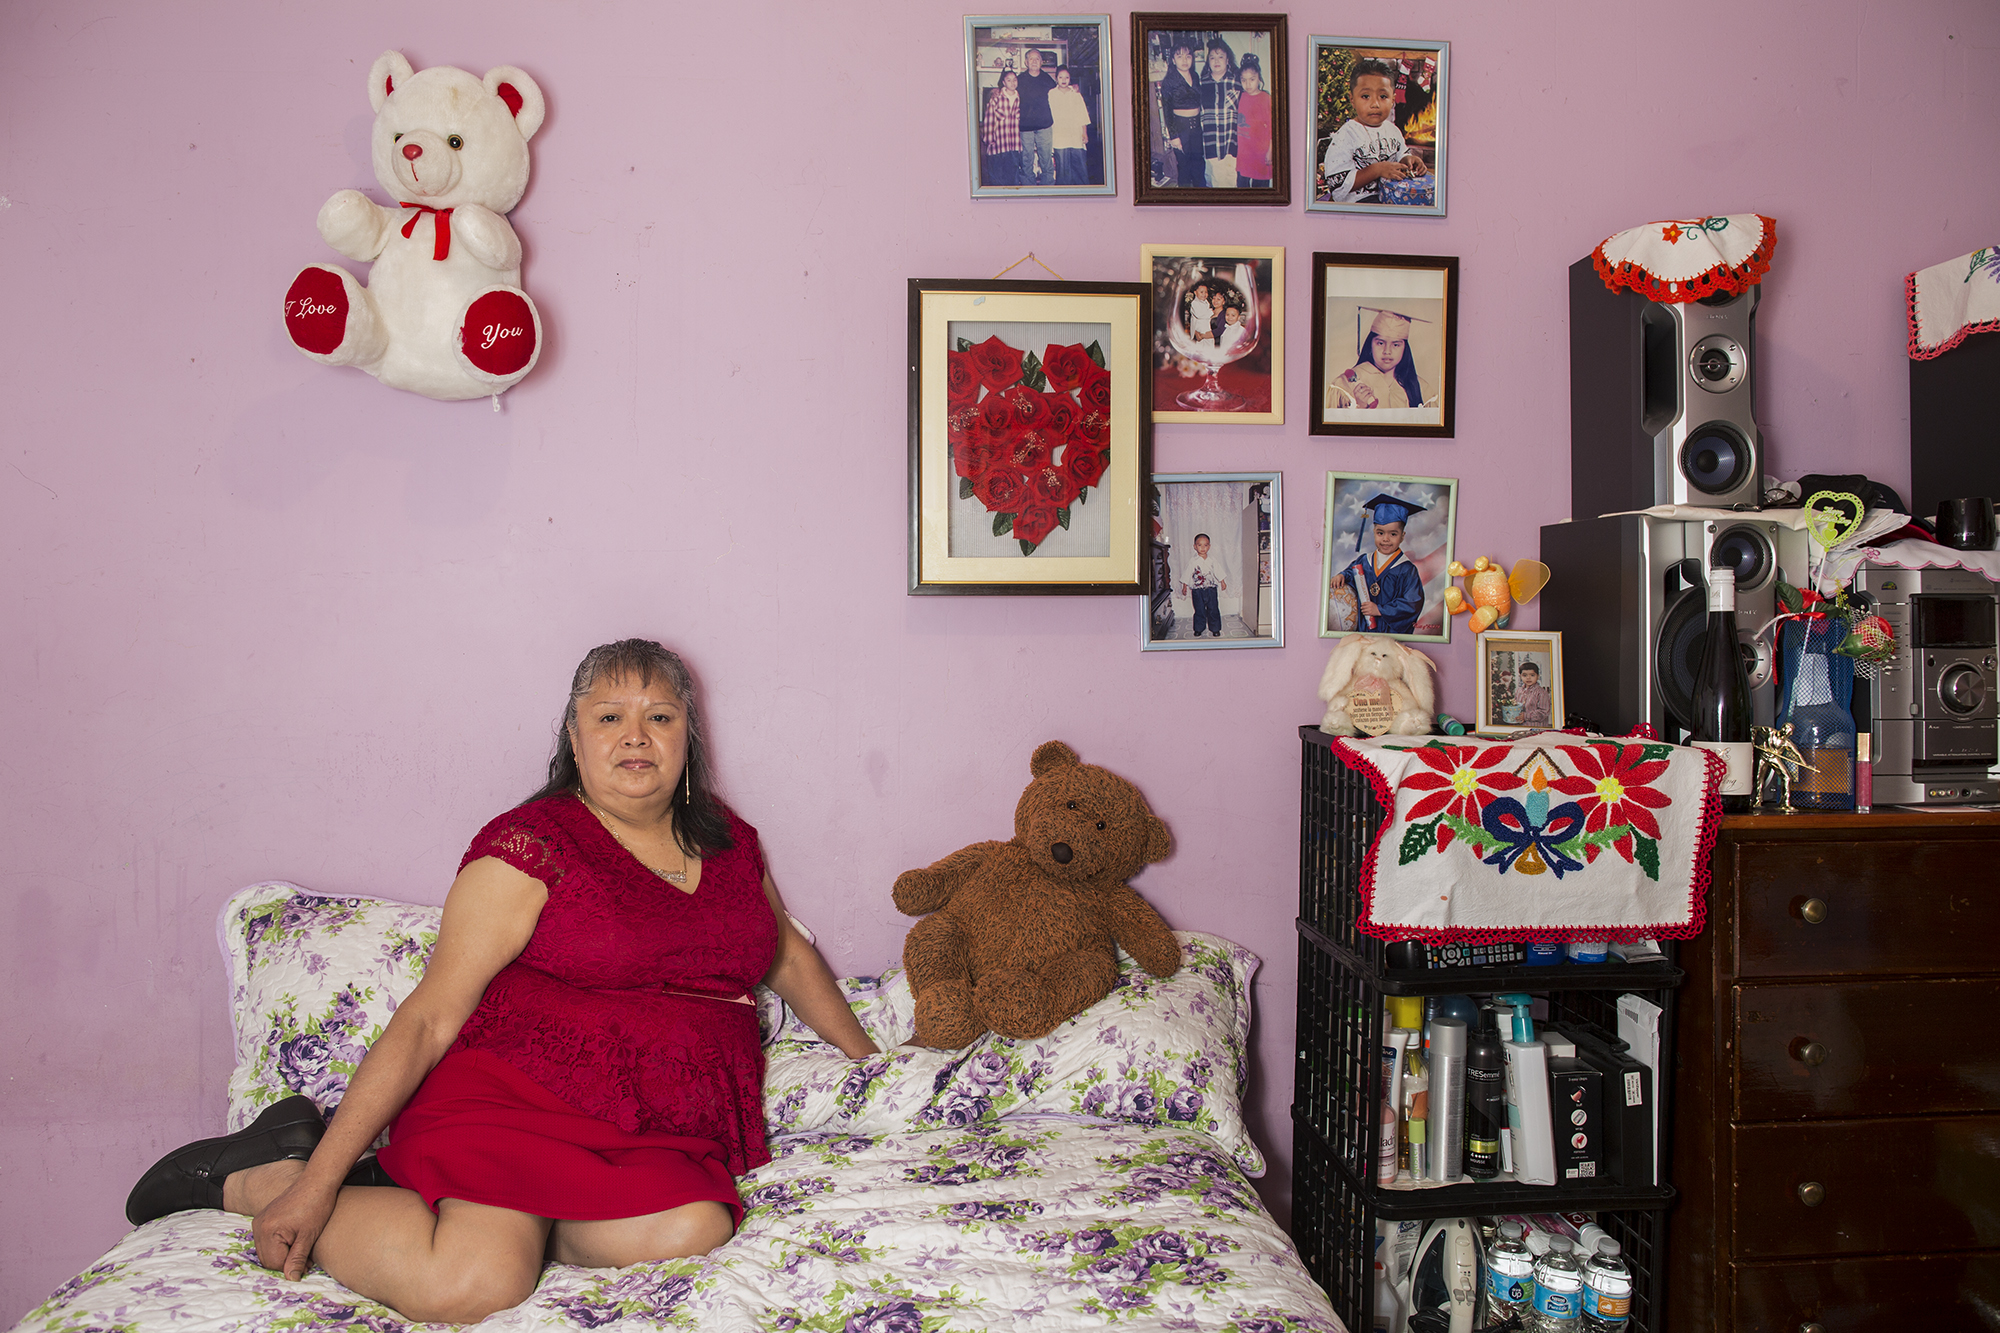  Engracia Arellano is an immigrant from Temascalapa, Puebla, México. She has been in New York for 25 years, working in different kinds of jobs but mainly in factories. For the last 11 years she has been living in Bushwick, Brooklyn, with her family. 